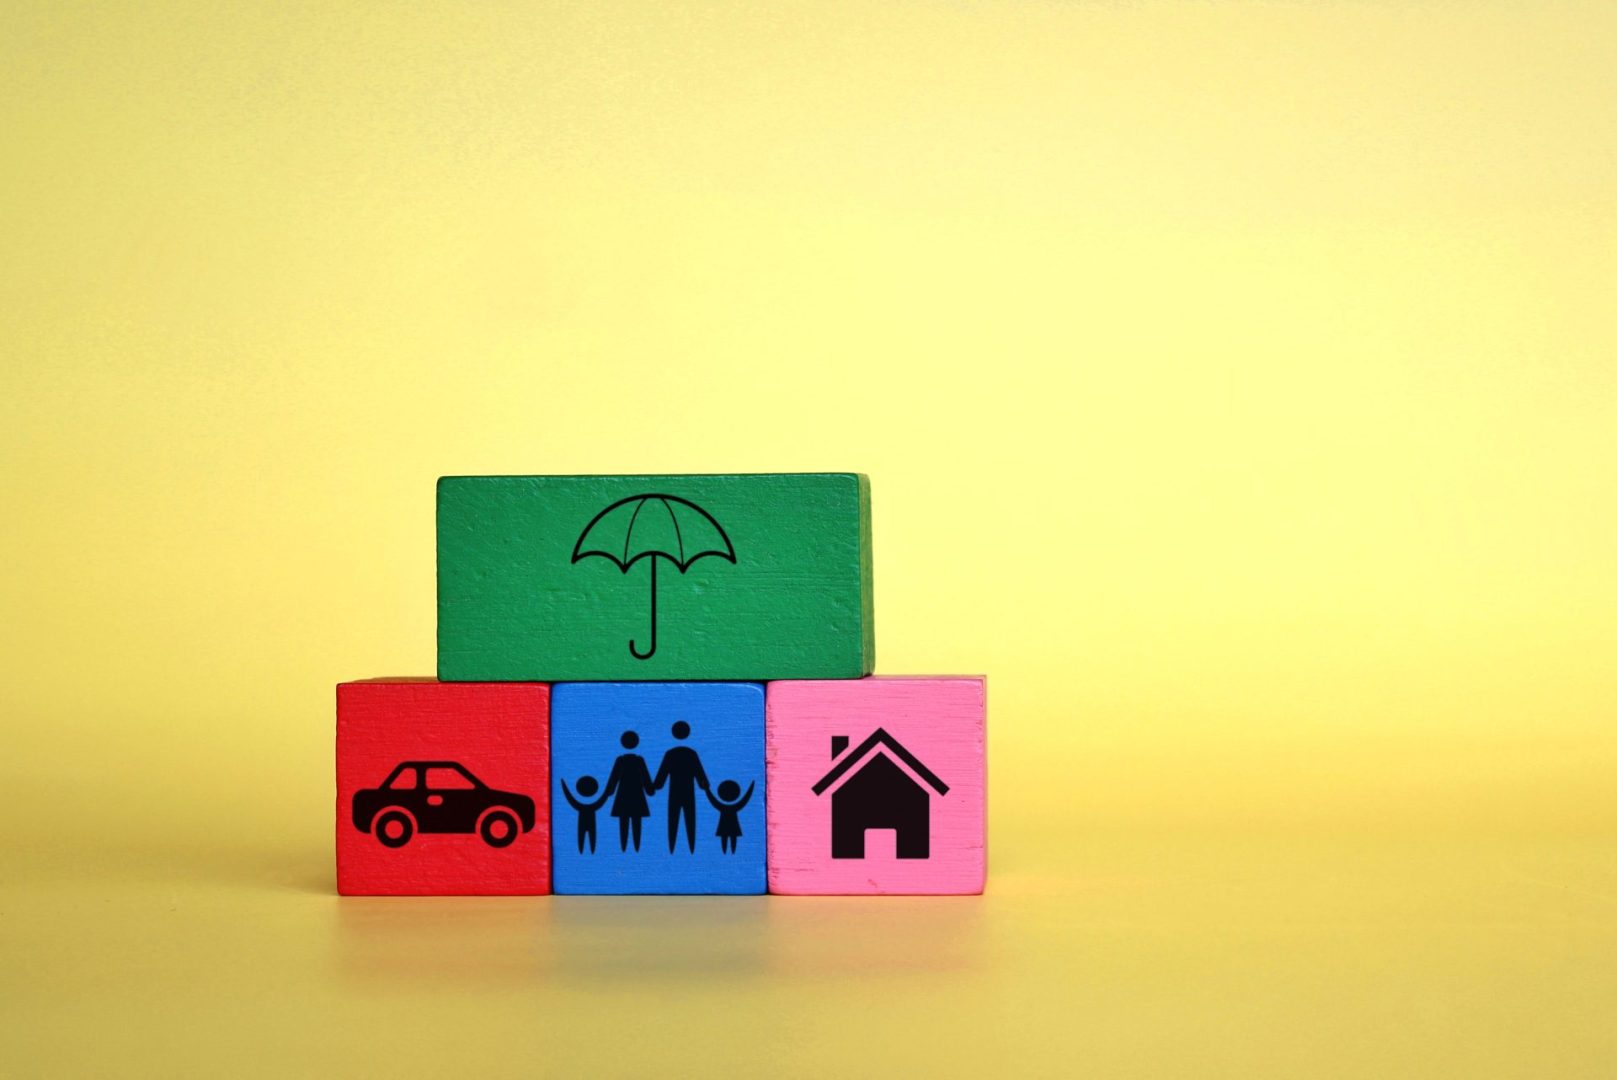 Insurance and protection concept. Wooden cubes with umbrella, car, family and house icon.